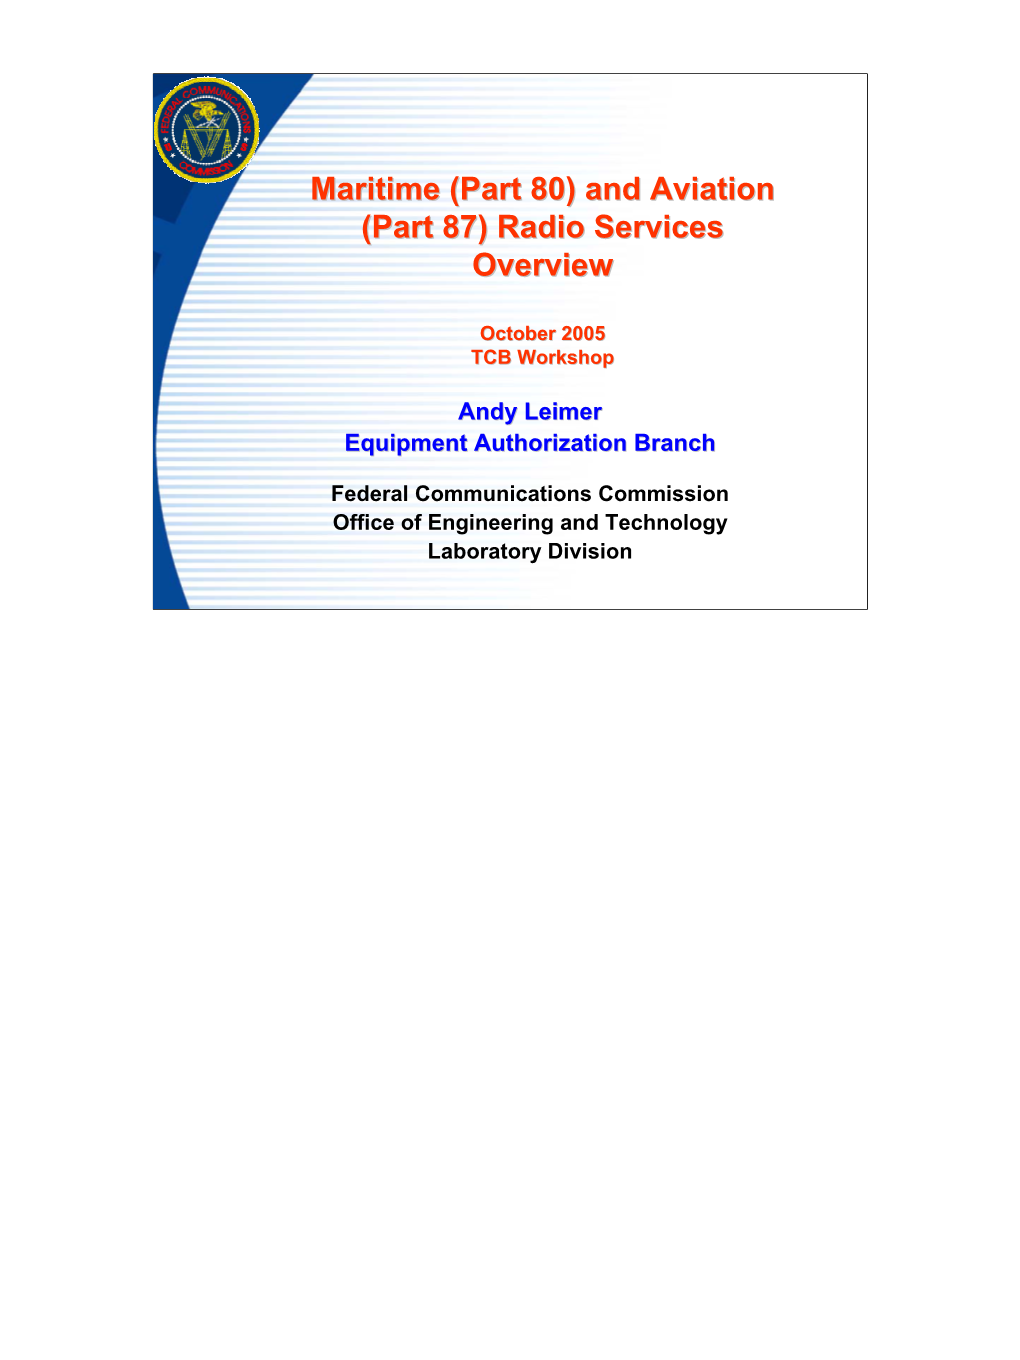 Maritime (Part 80) and Aviation (Part 87) Radio Services Overview